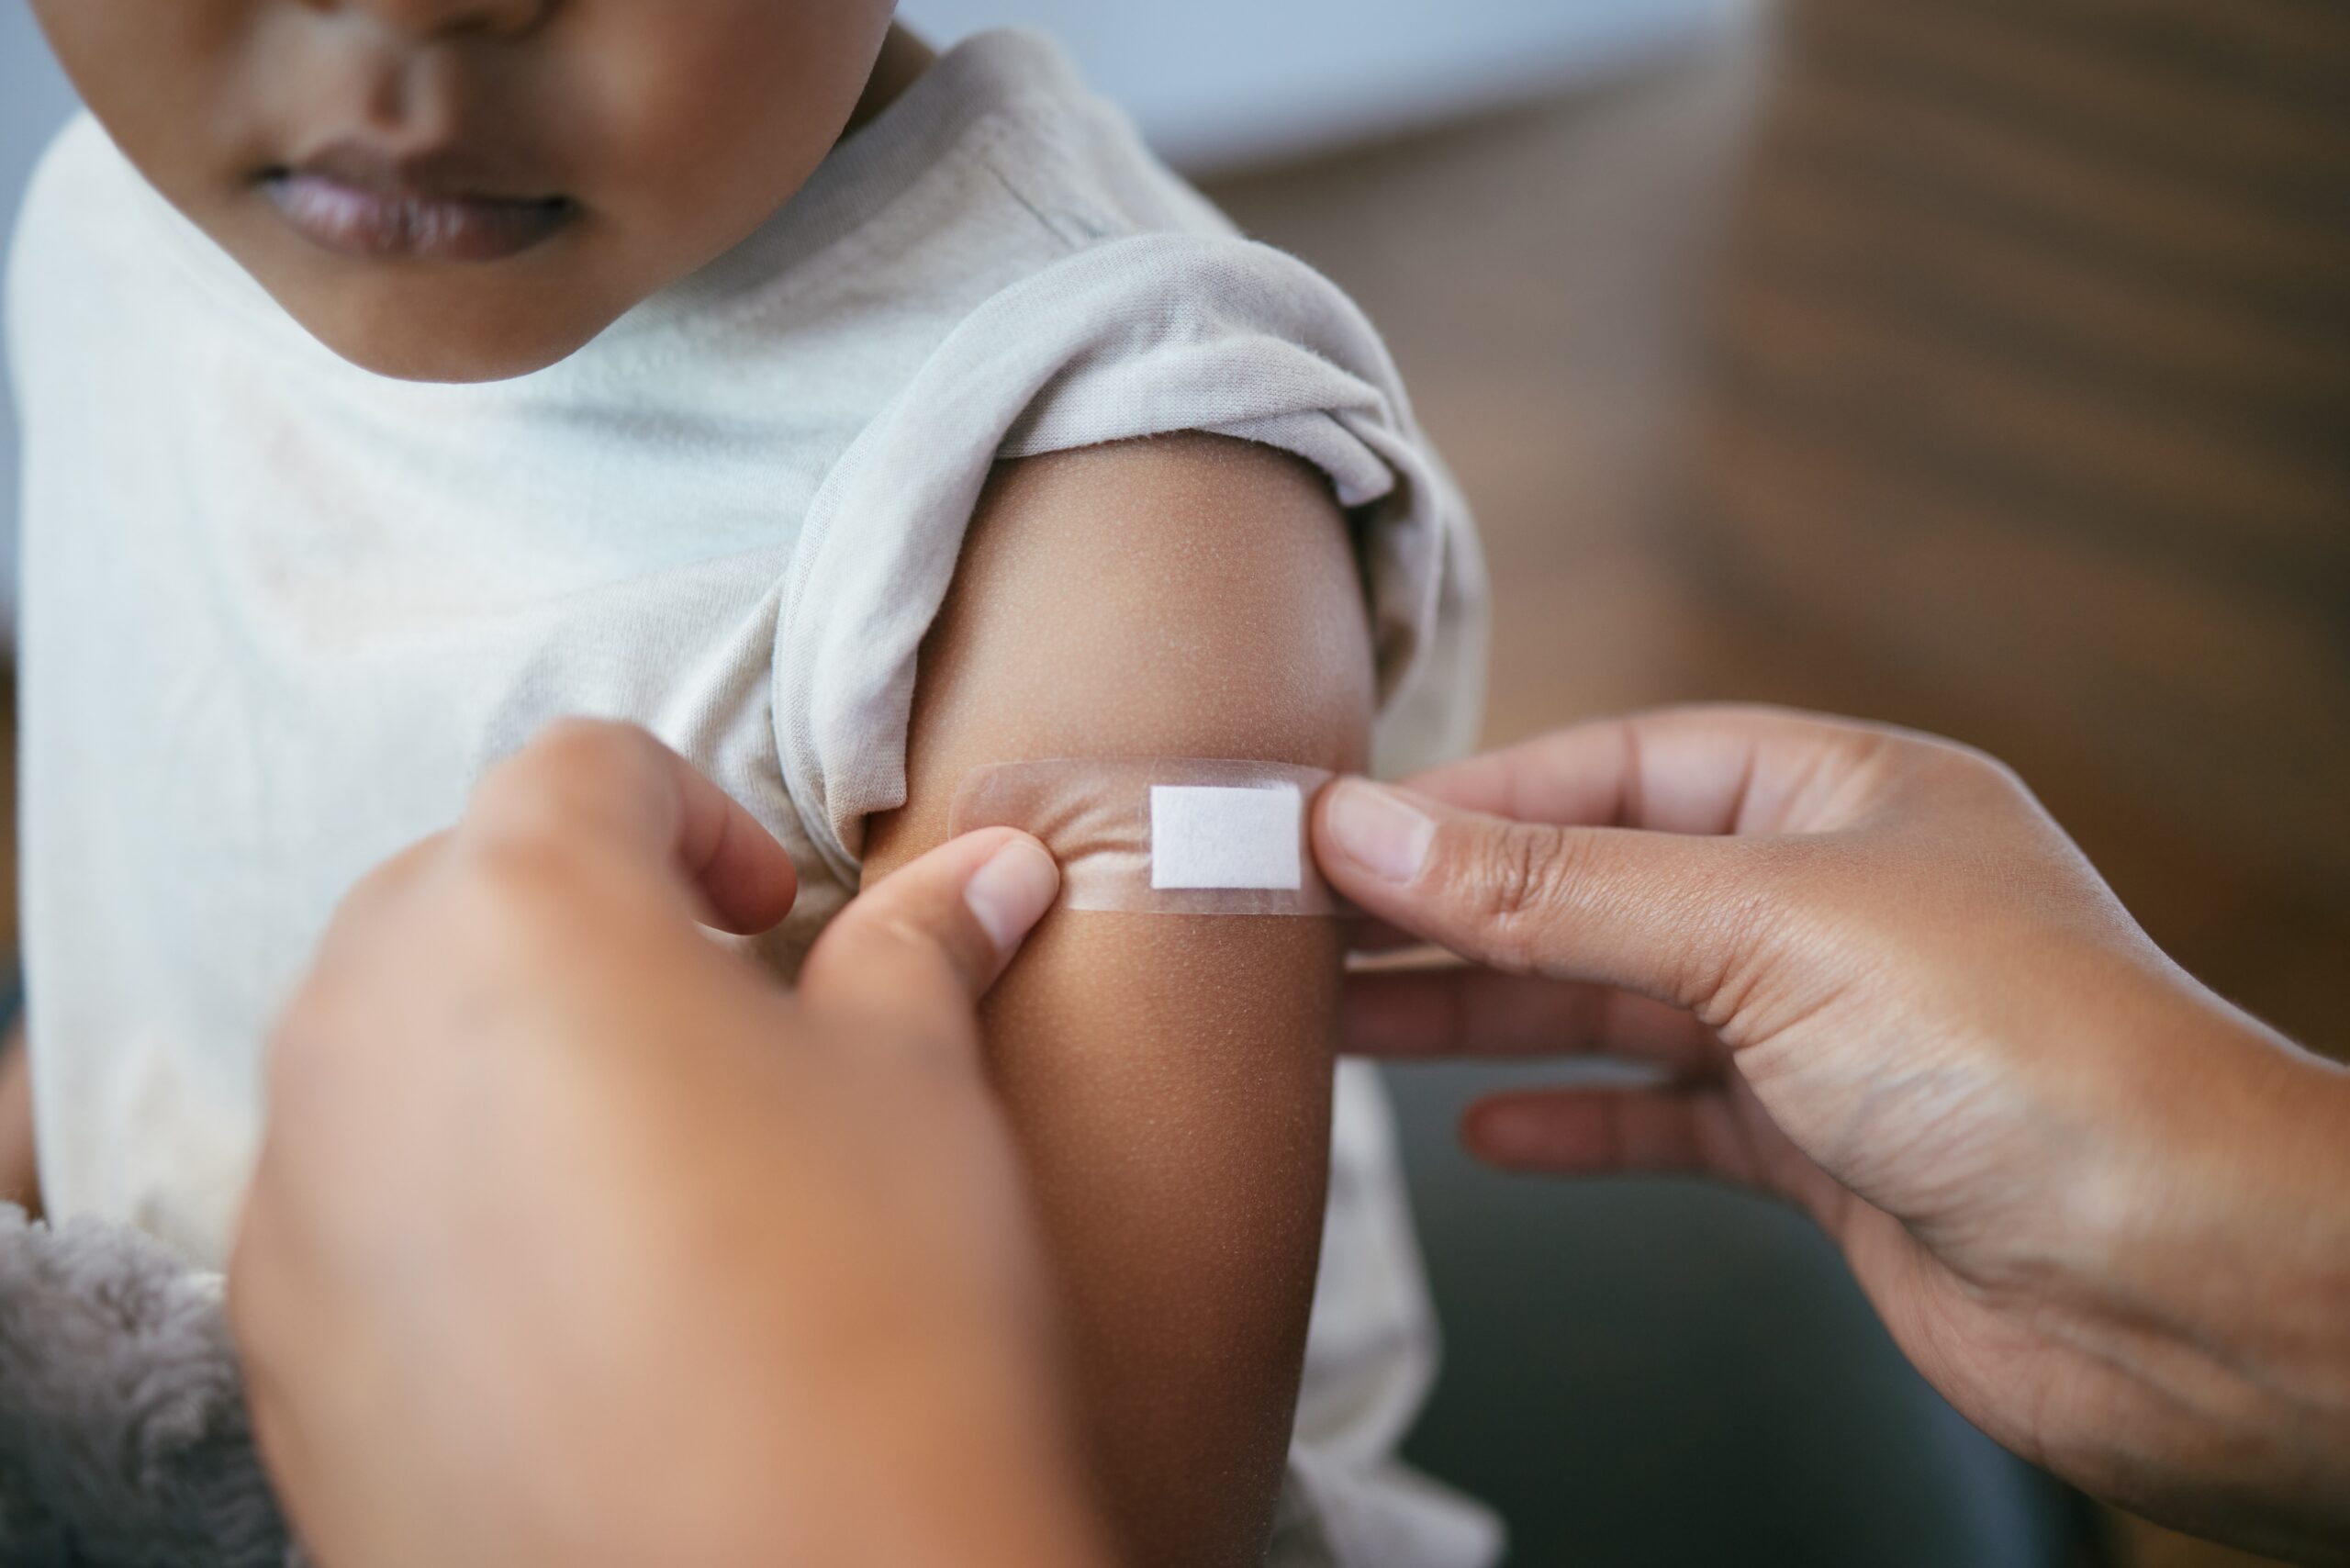 Child receiving vaccination